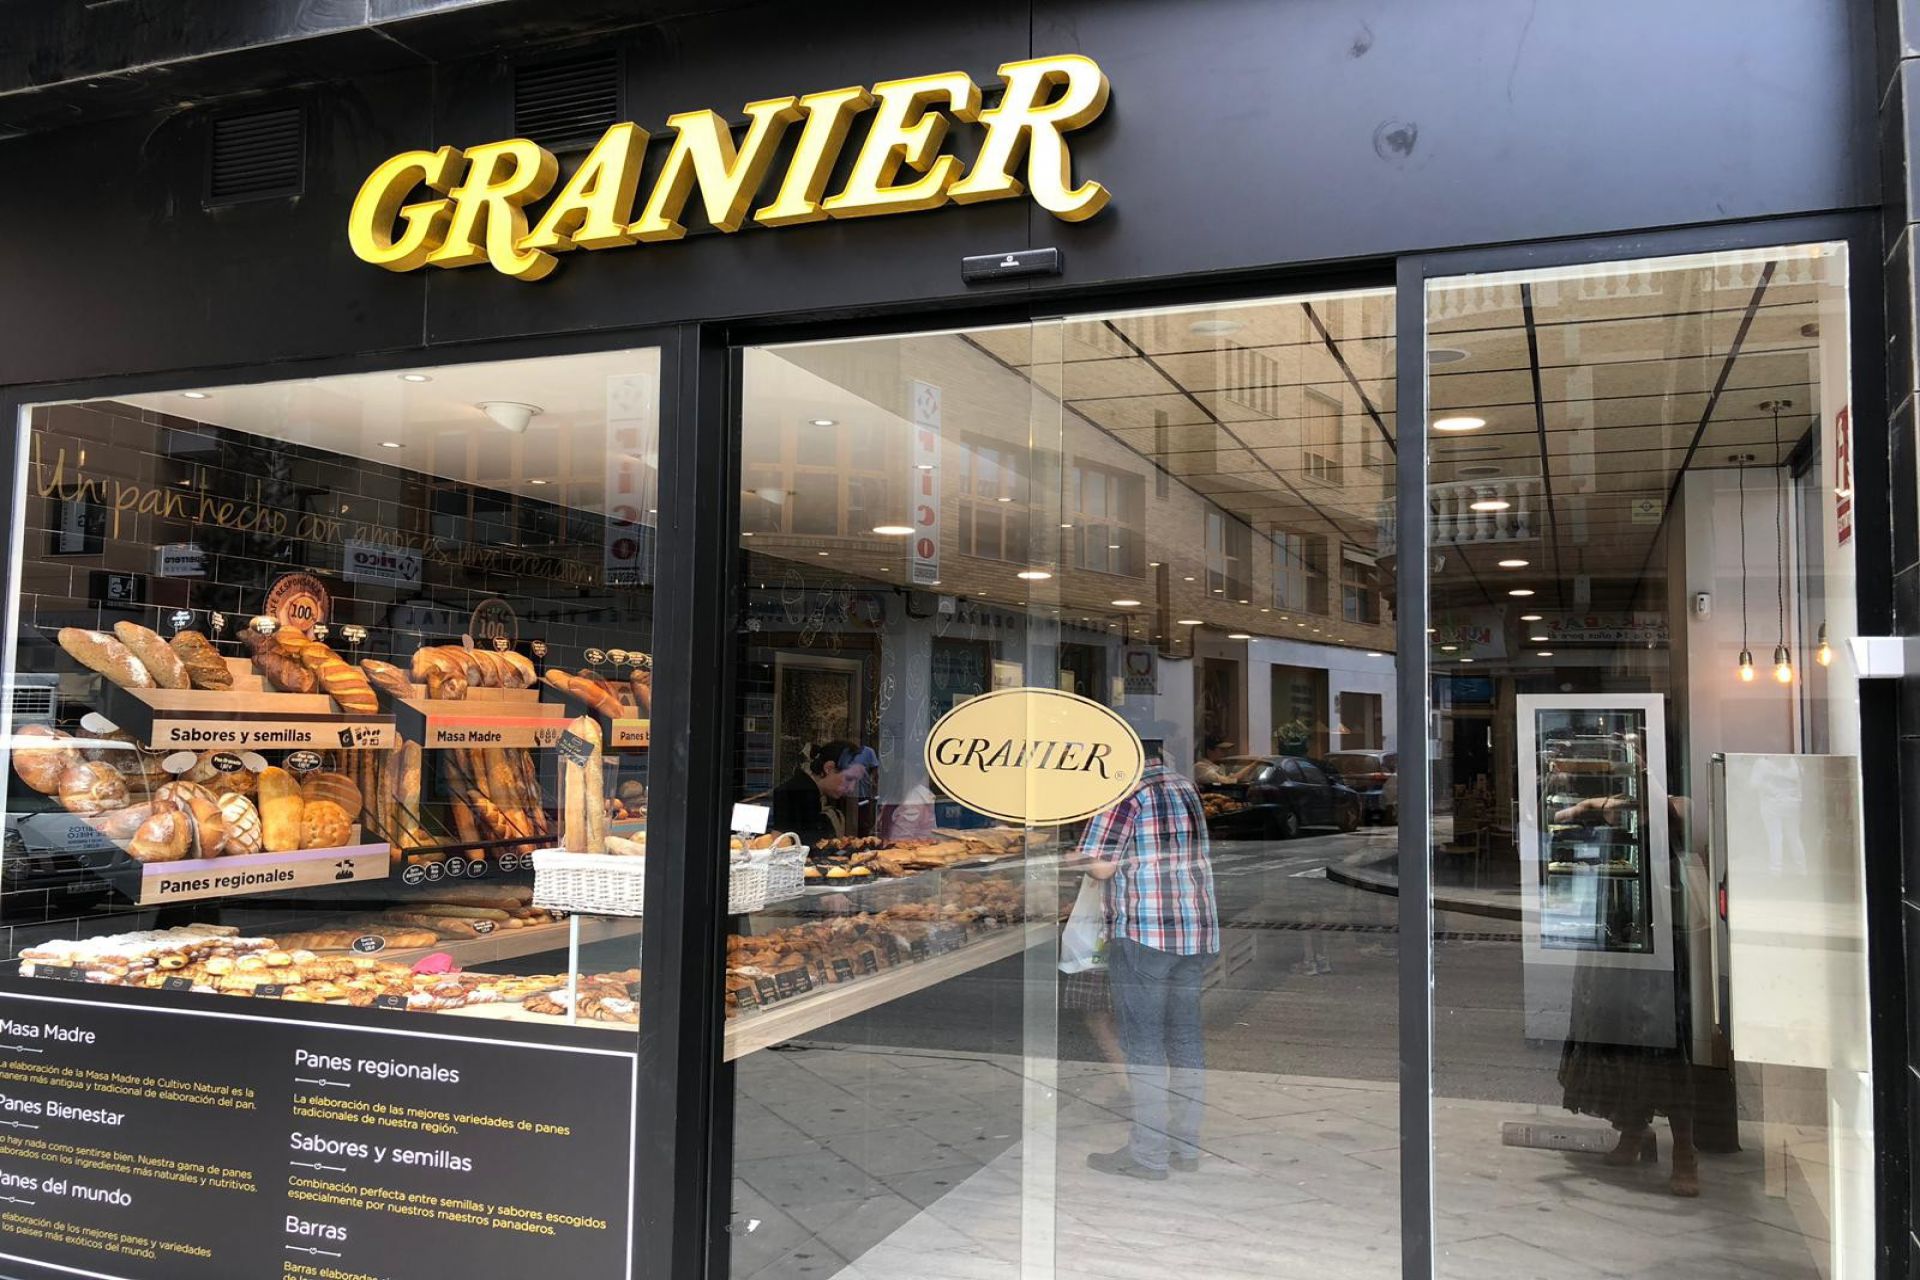 BAKERY AND COFFEE SHOP, GRANIER